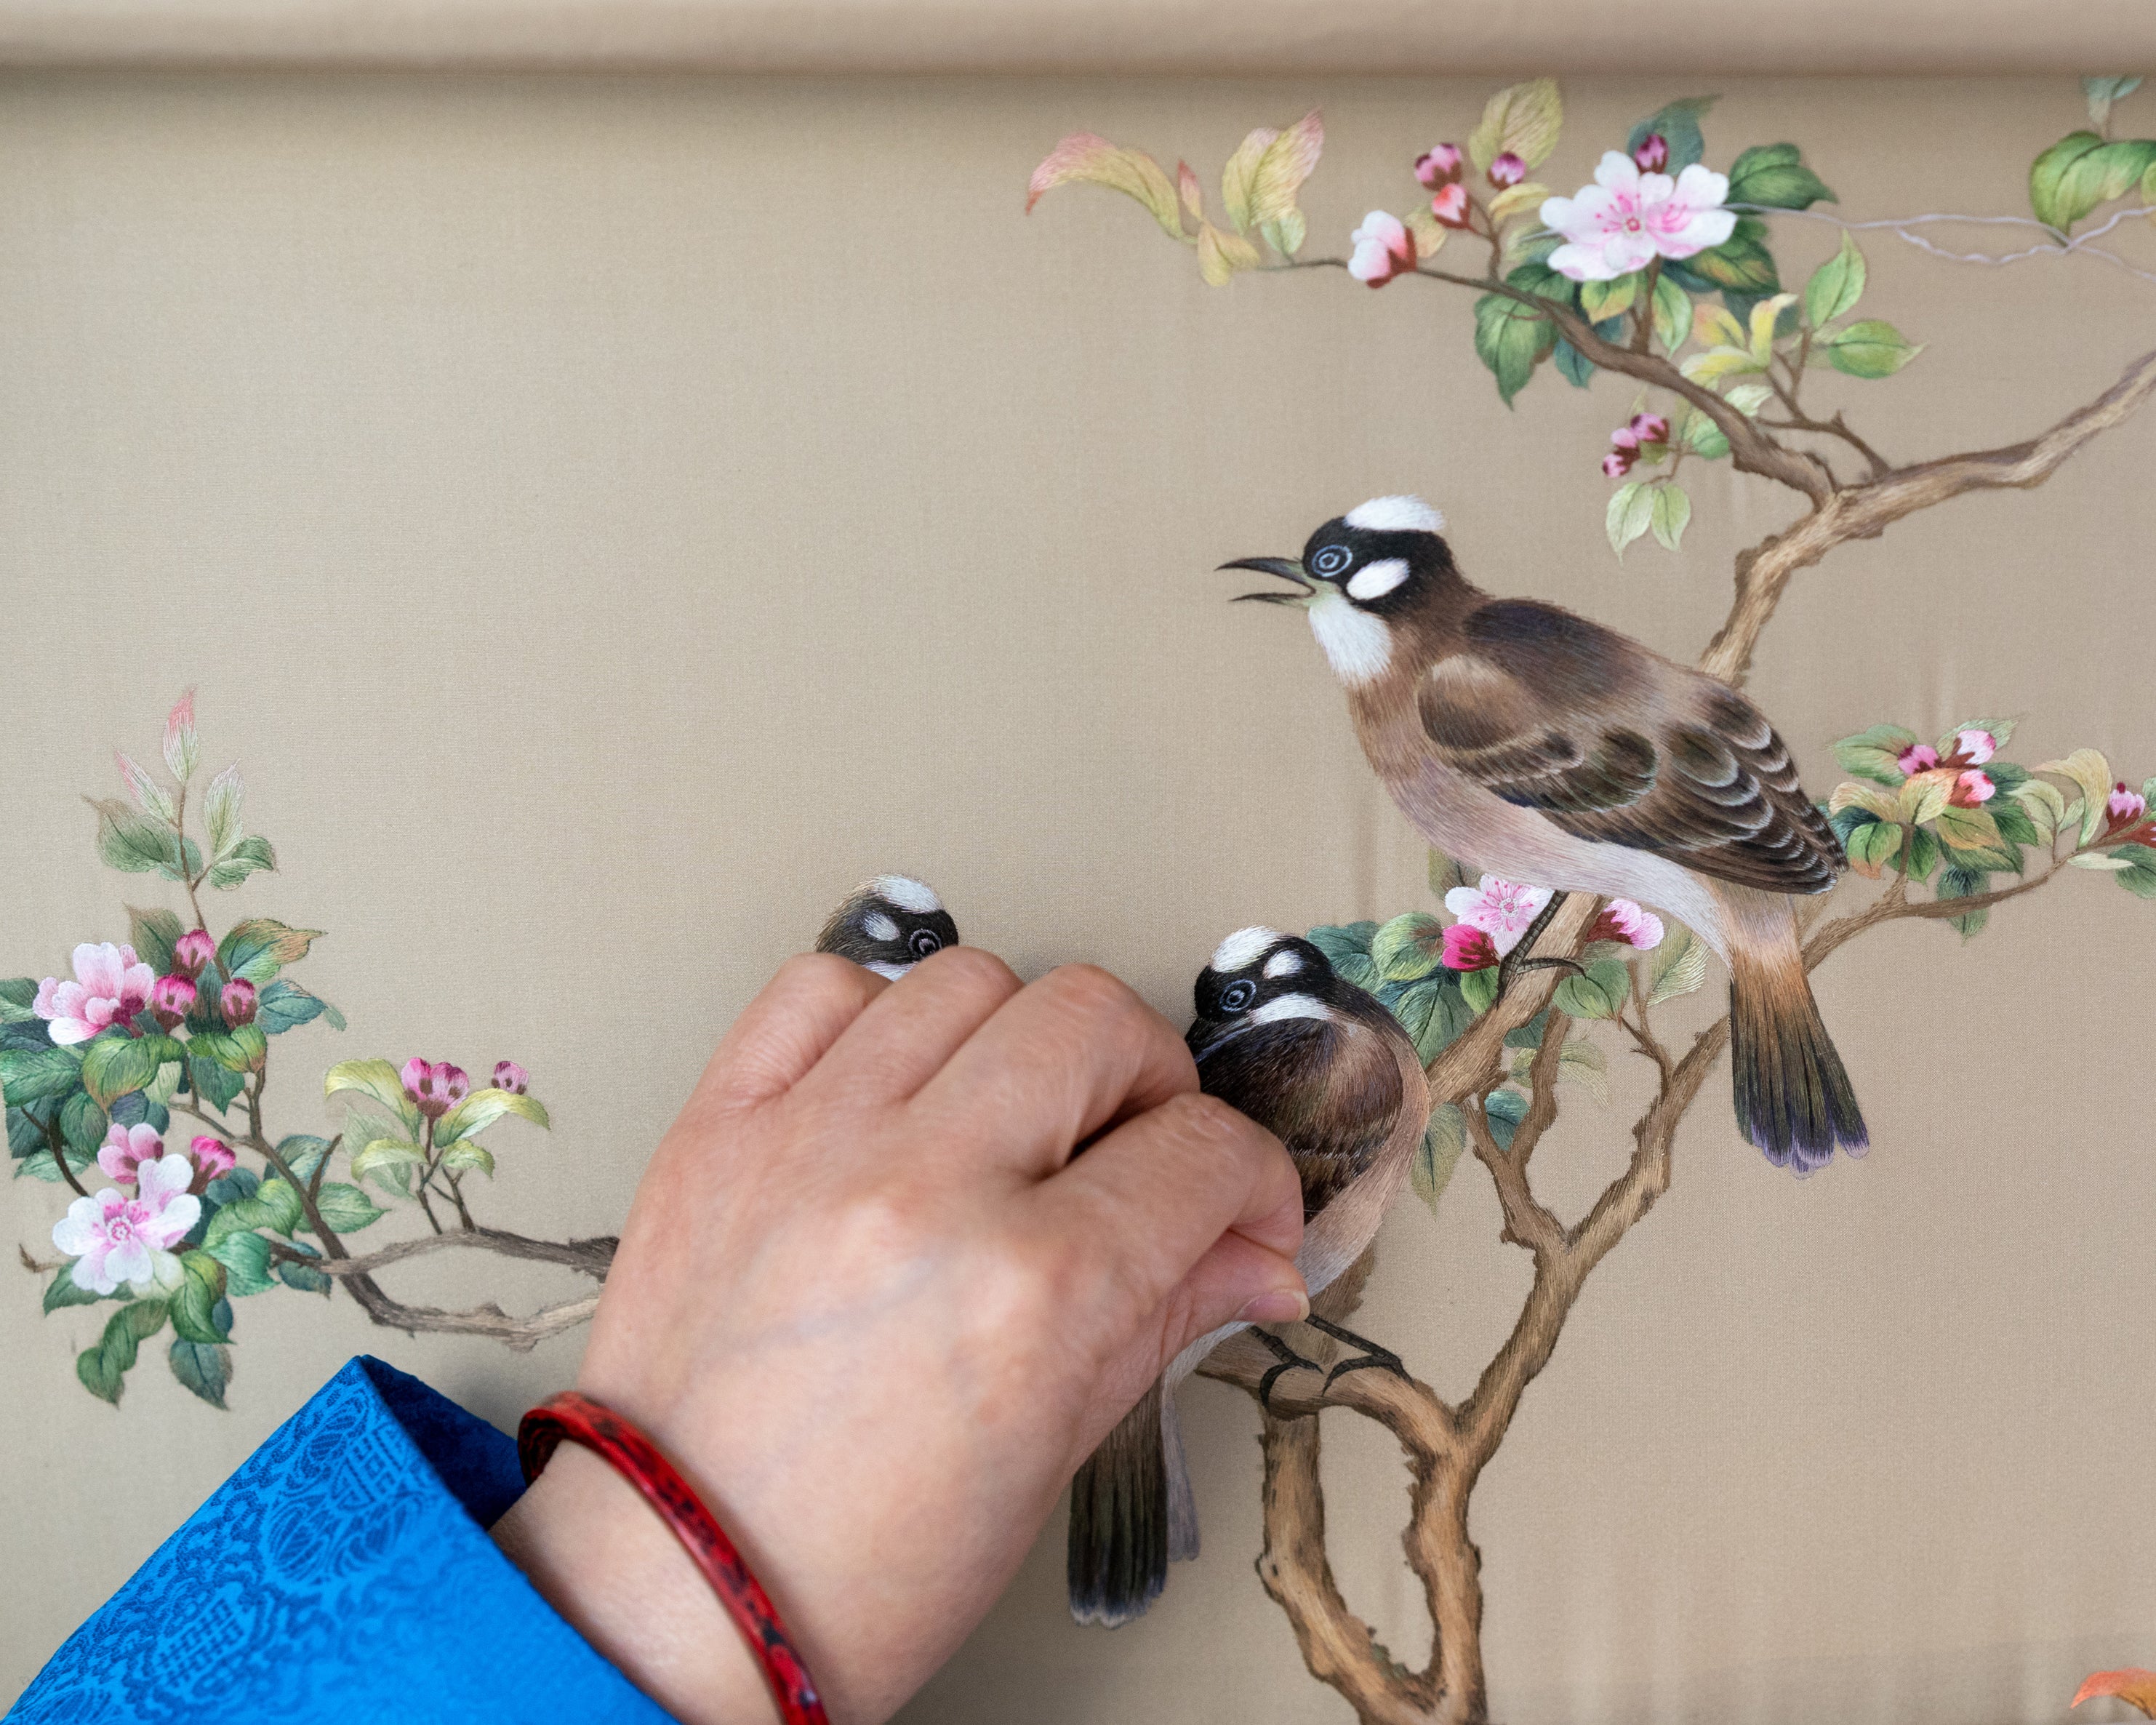 A flock of birds come alive in the skilled hands of Fu Xianghong, a master of Su embroidery known for her flower-and-bird works